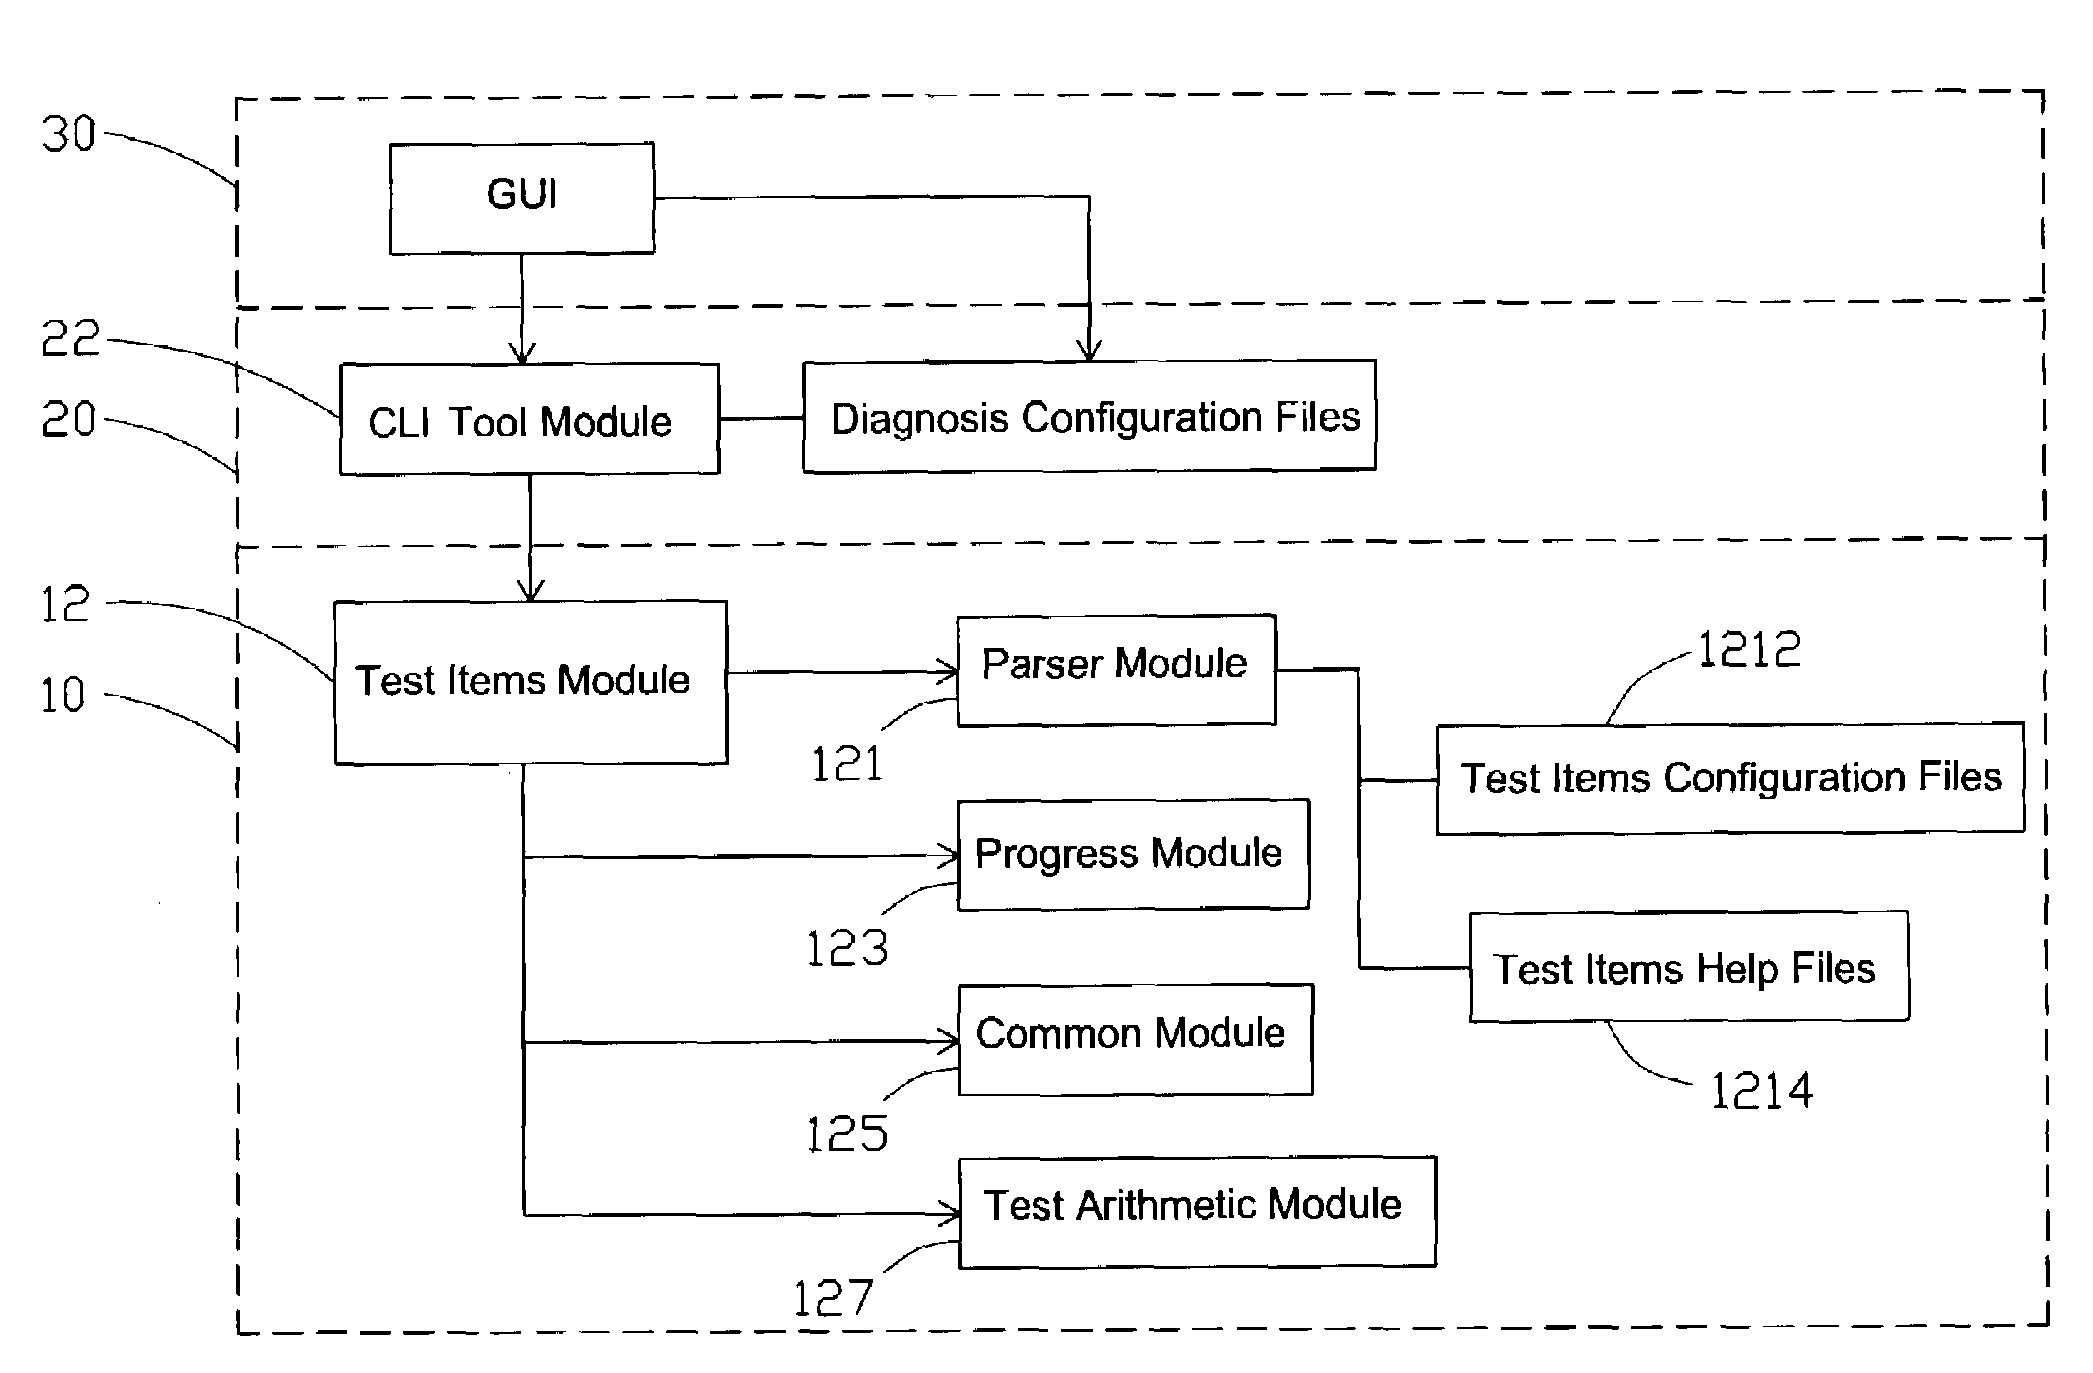 System for diagnosing and testing computers